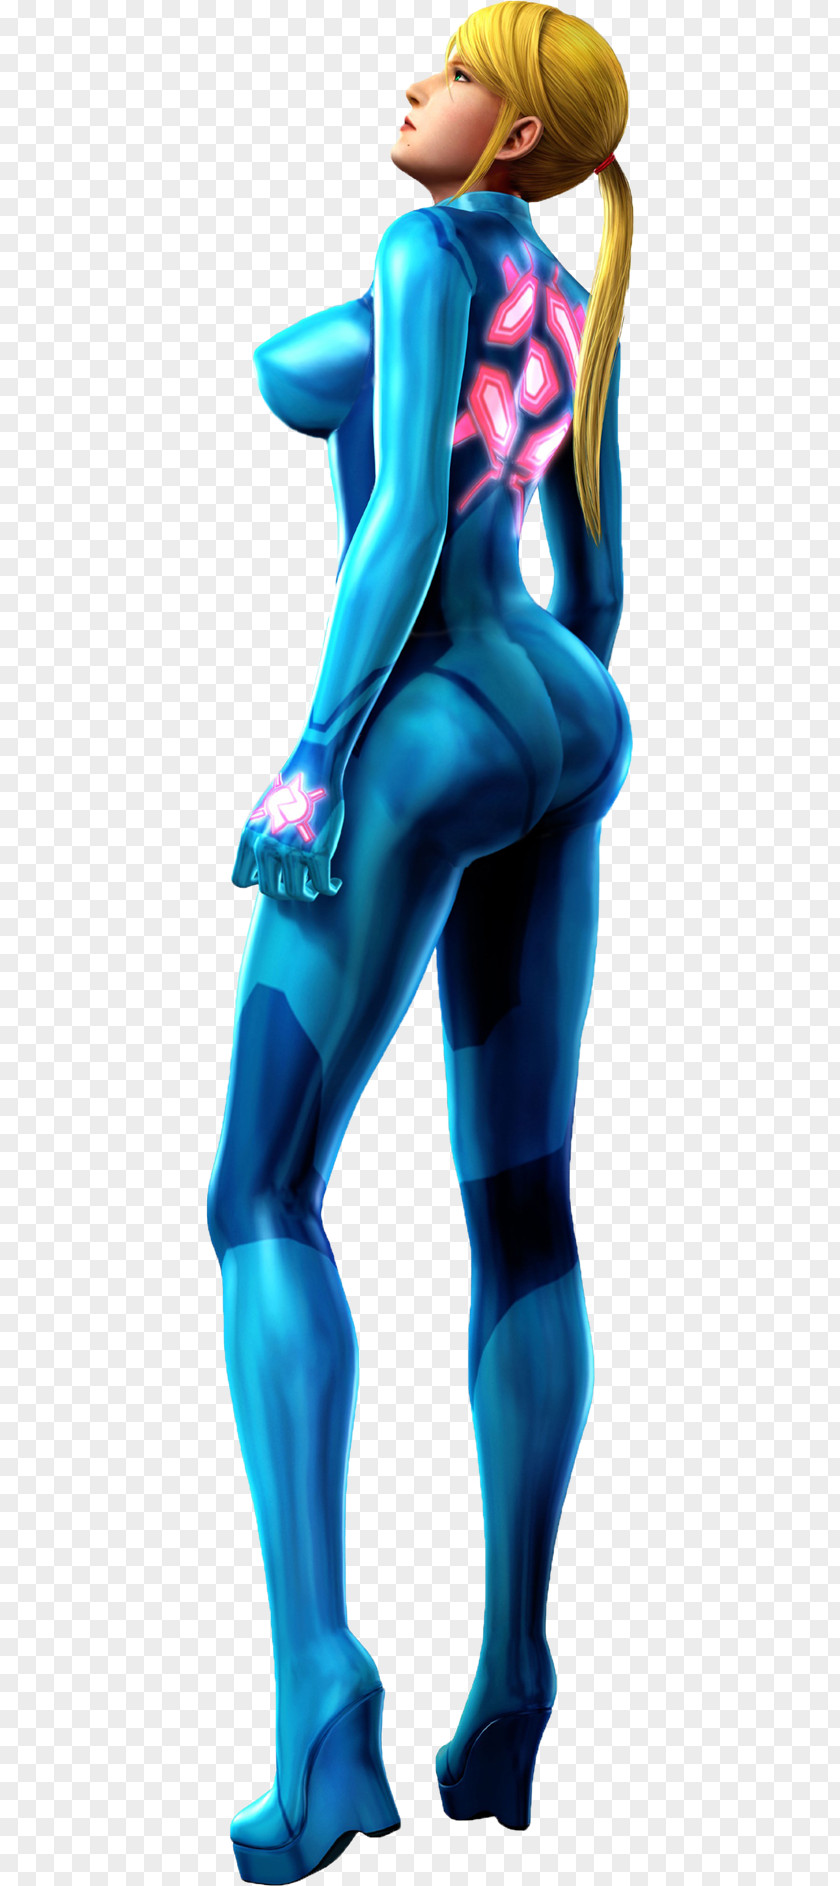 Pant Metroid: Other M Zero Mission Super Smash Bros. Brawl For Nintendo 3DS And Wii U PNG